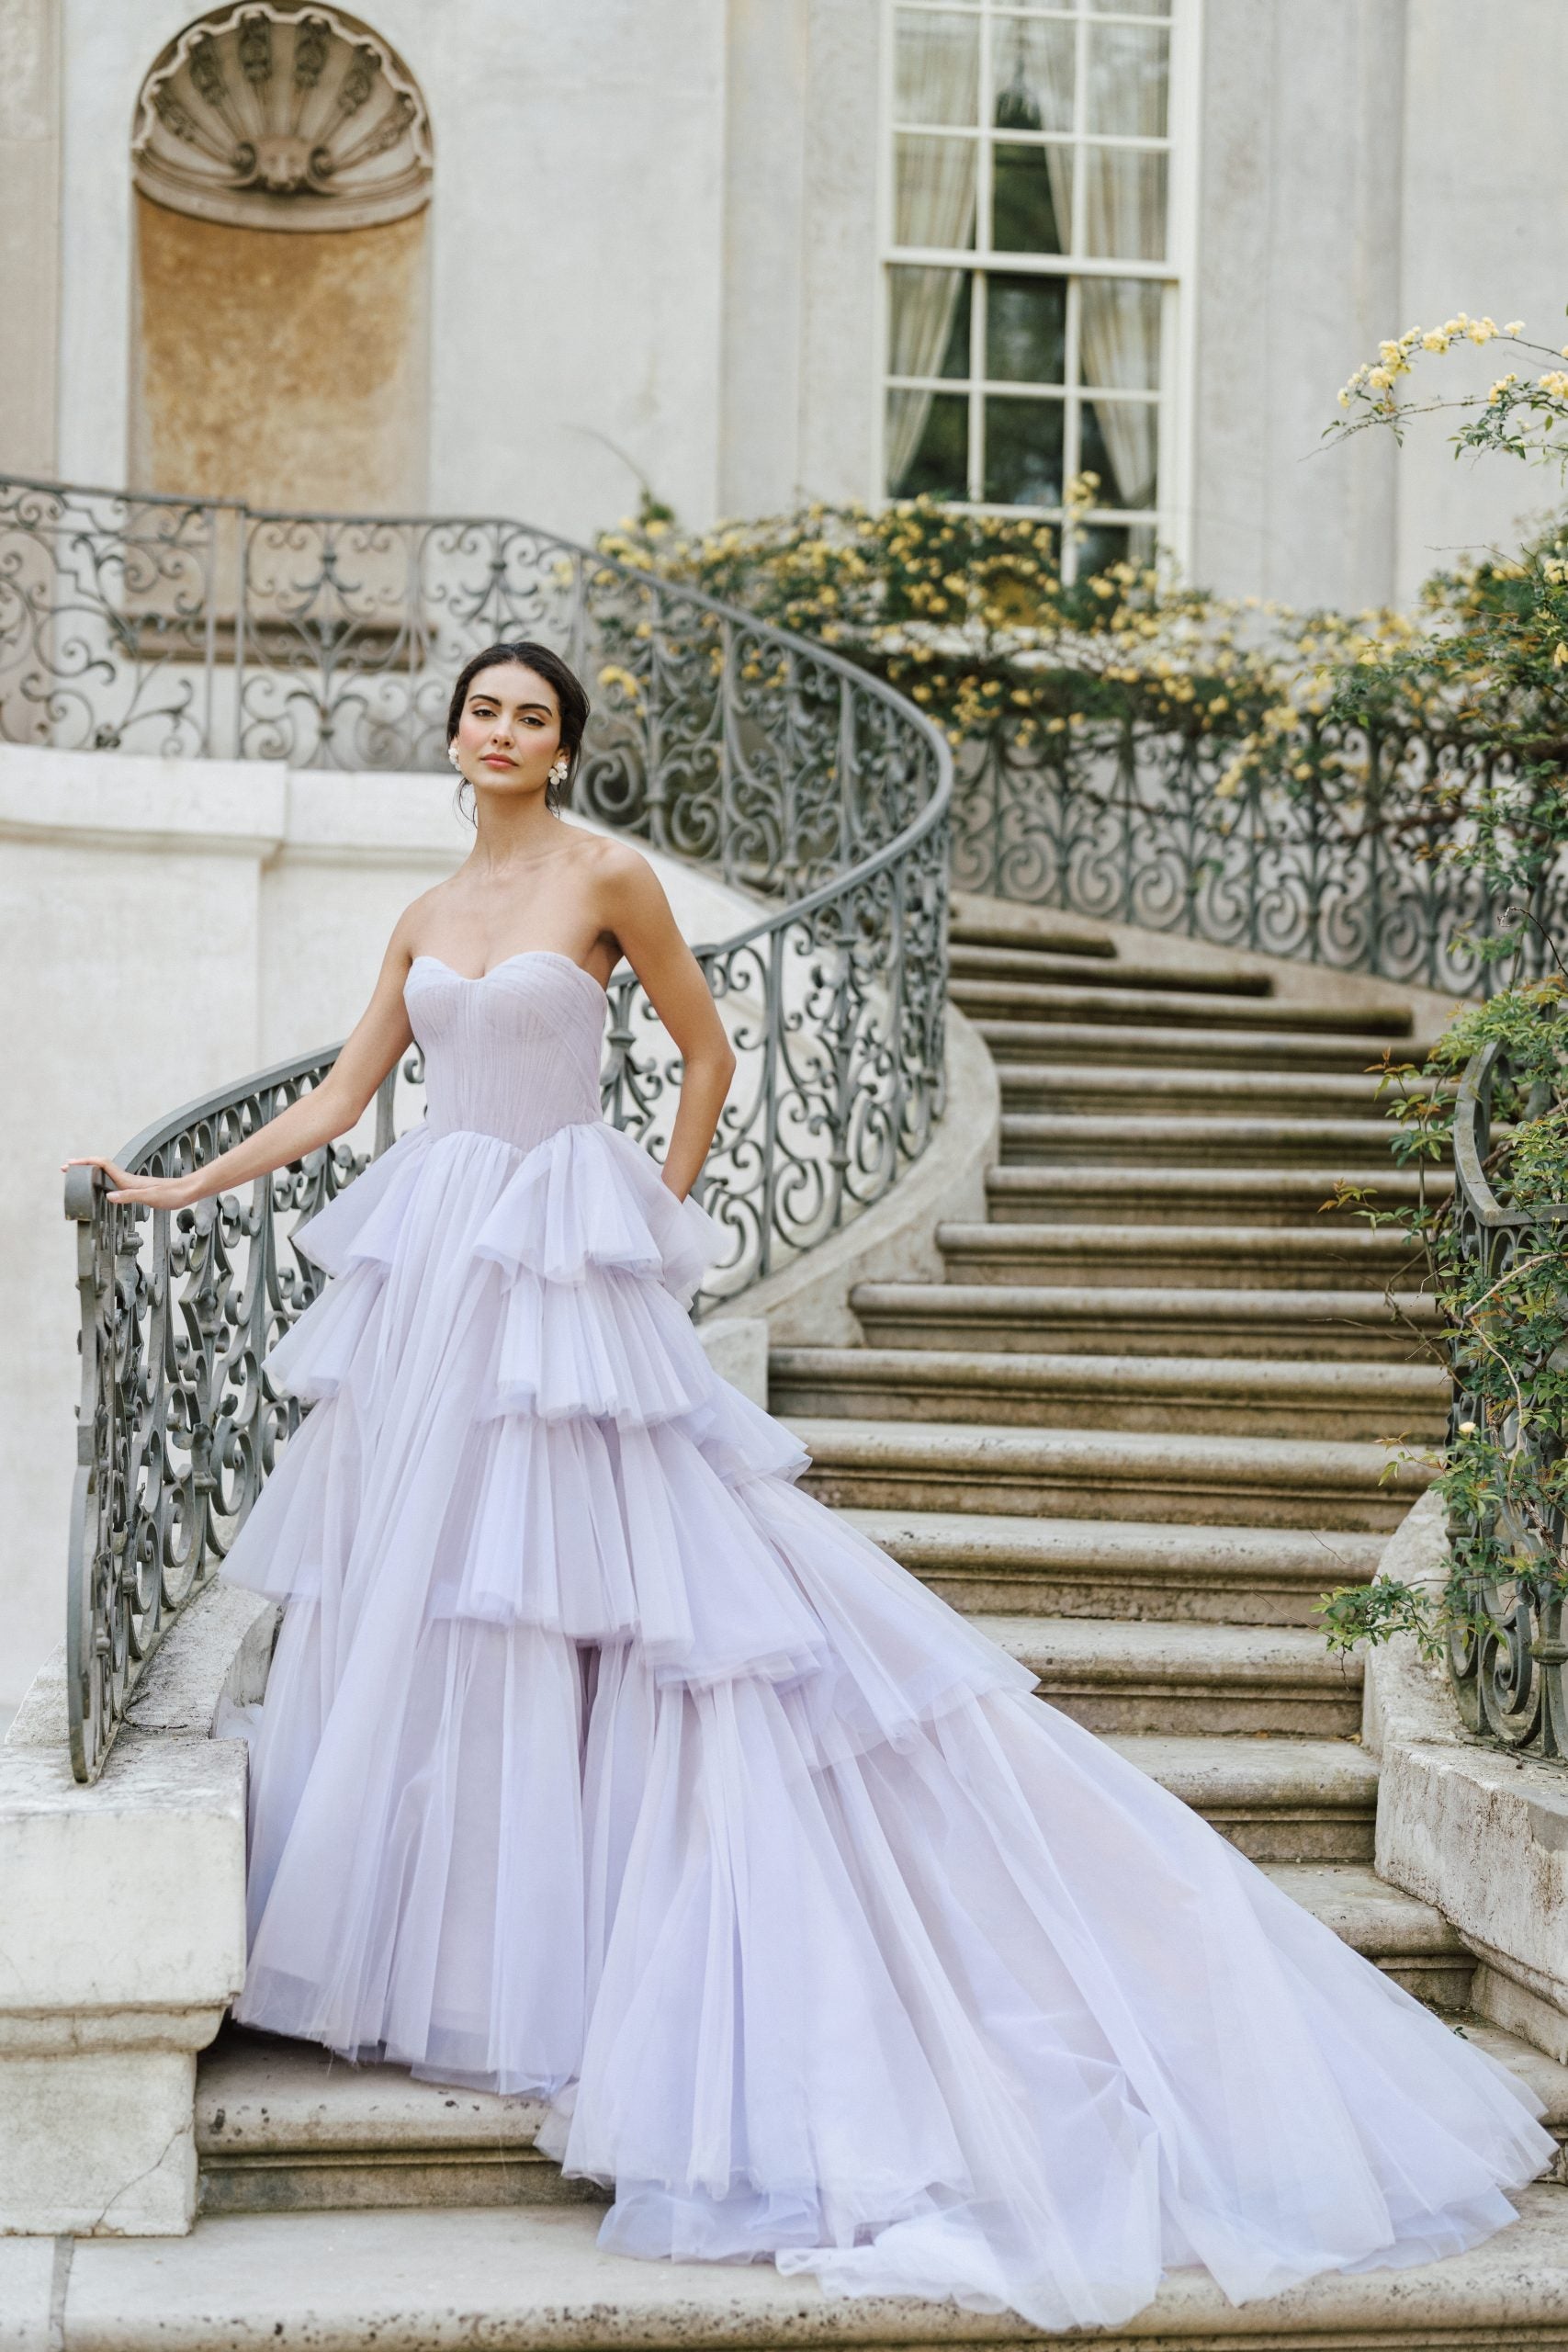 Lavender Tulle Ball Gown by Anne Barge - Image 1